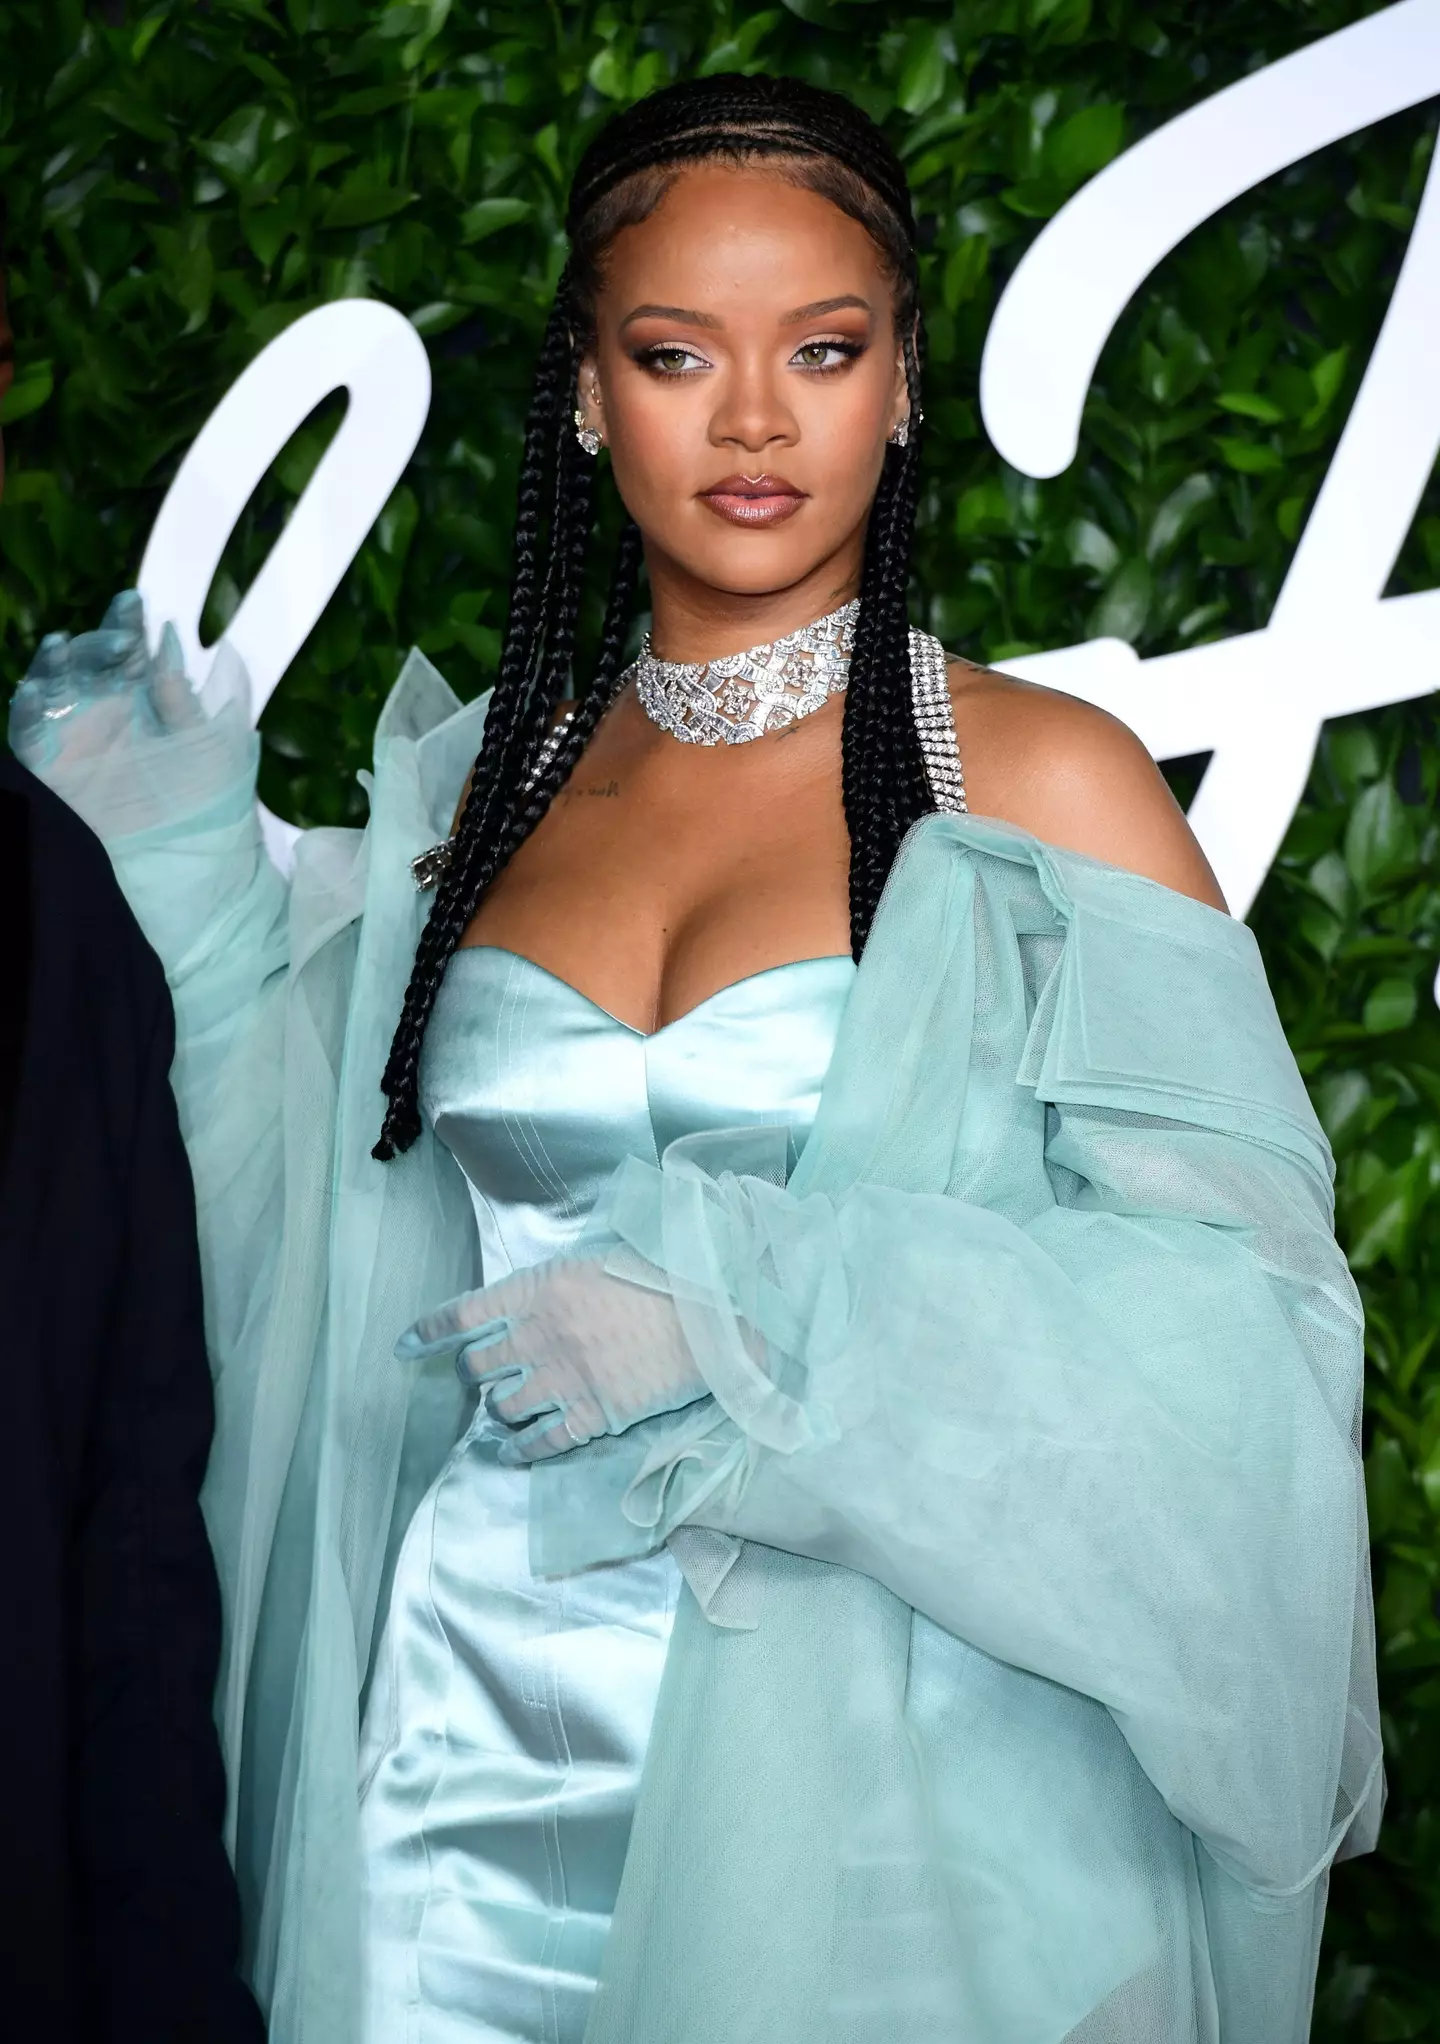 Rihanna won't get paid for her Super Bowl halftime show.